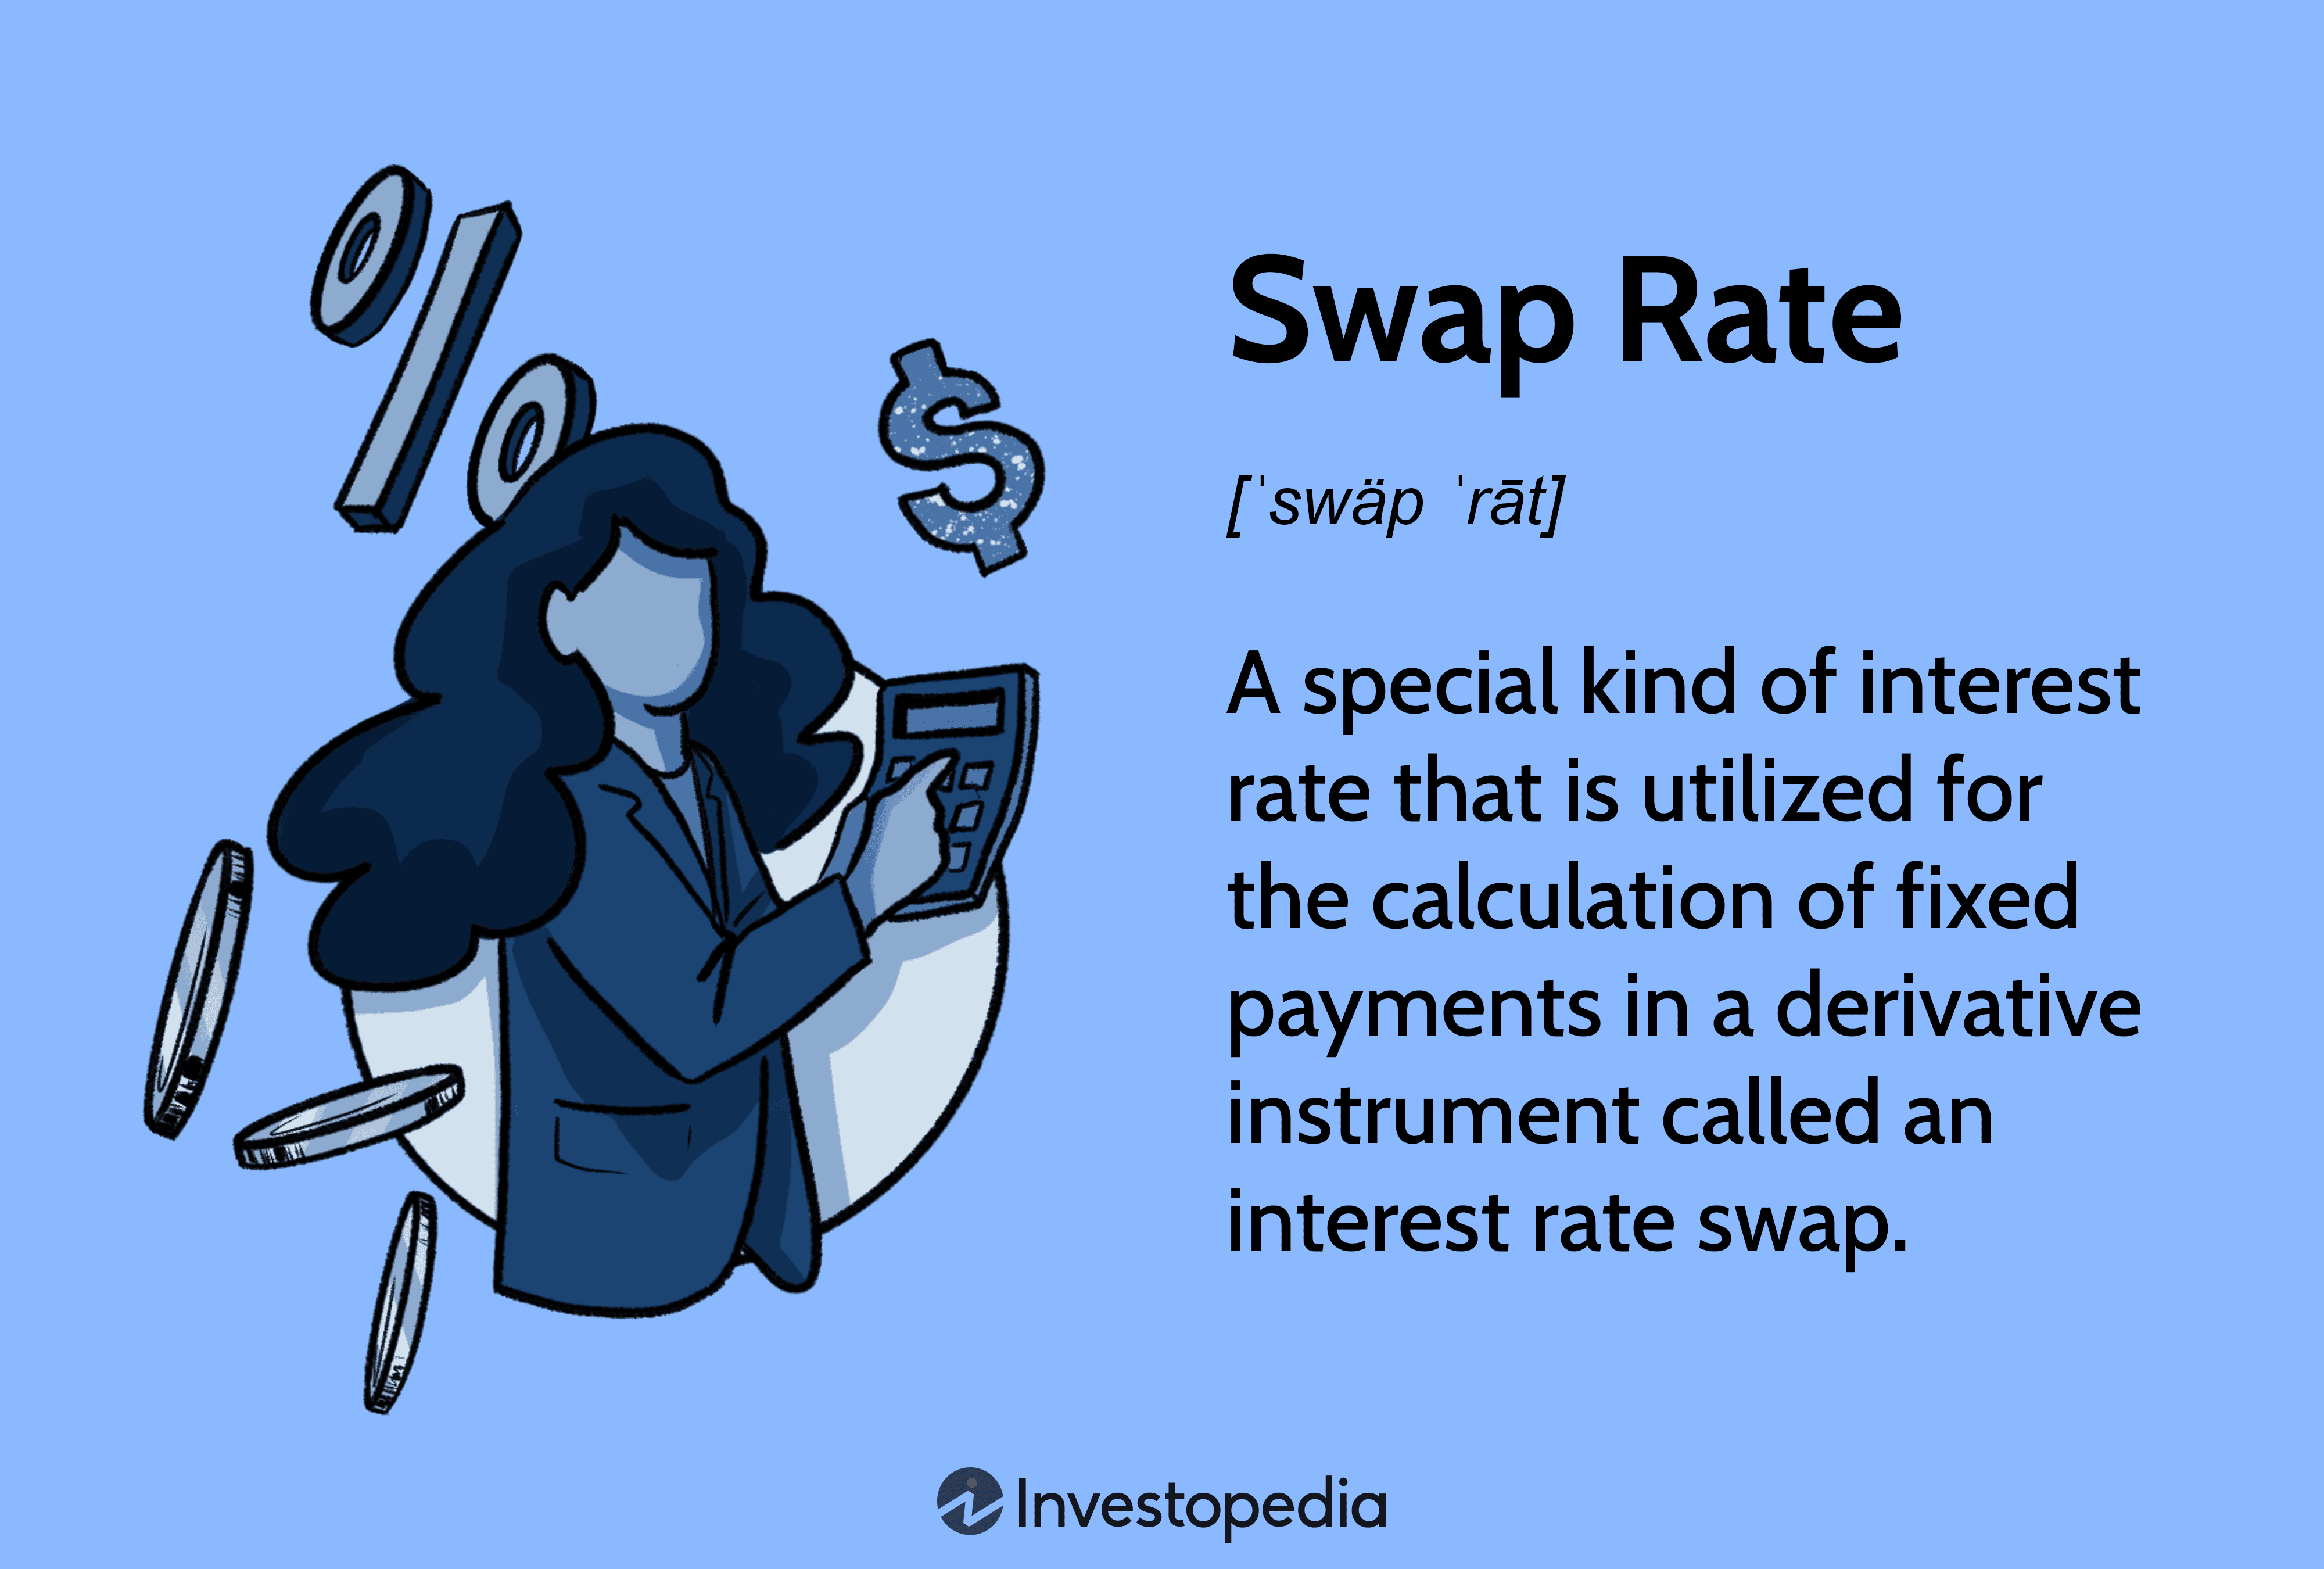 Swap Rate: A special kind of interest rate that is utilized for the calculation of fixed payments in a derivative instrument called an interest rate swap.